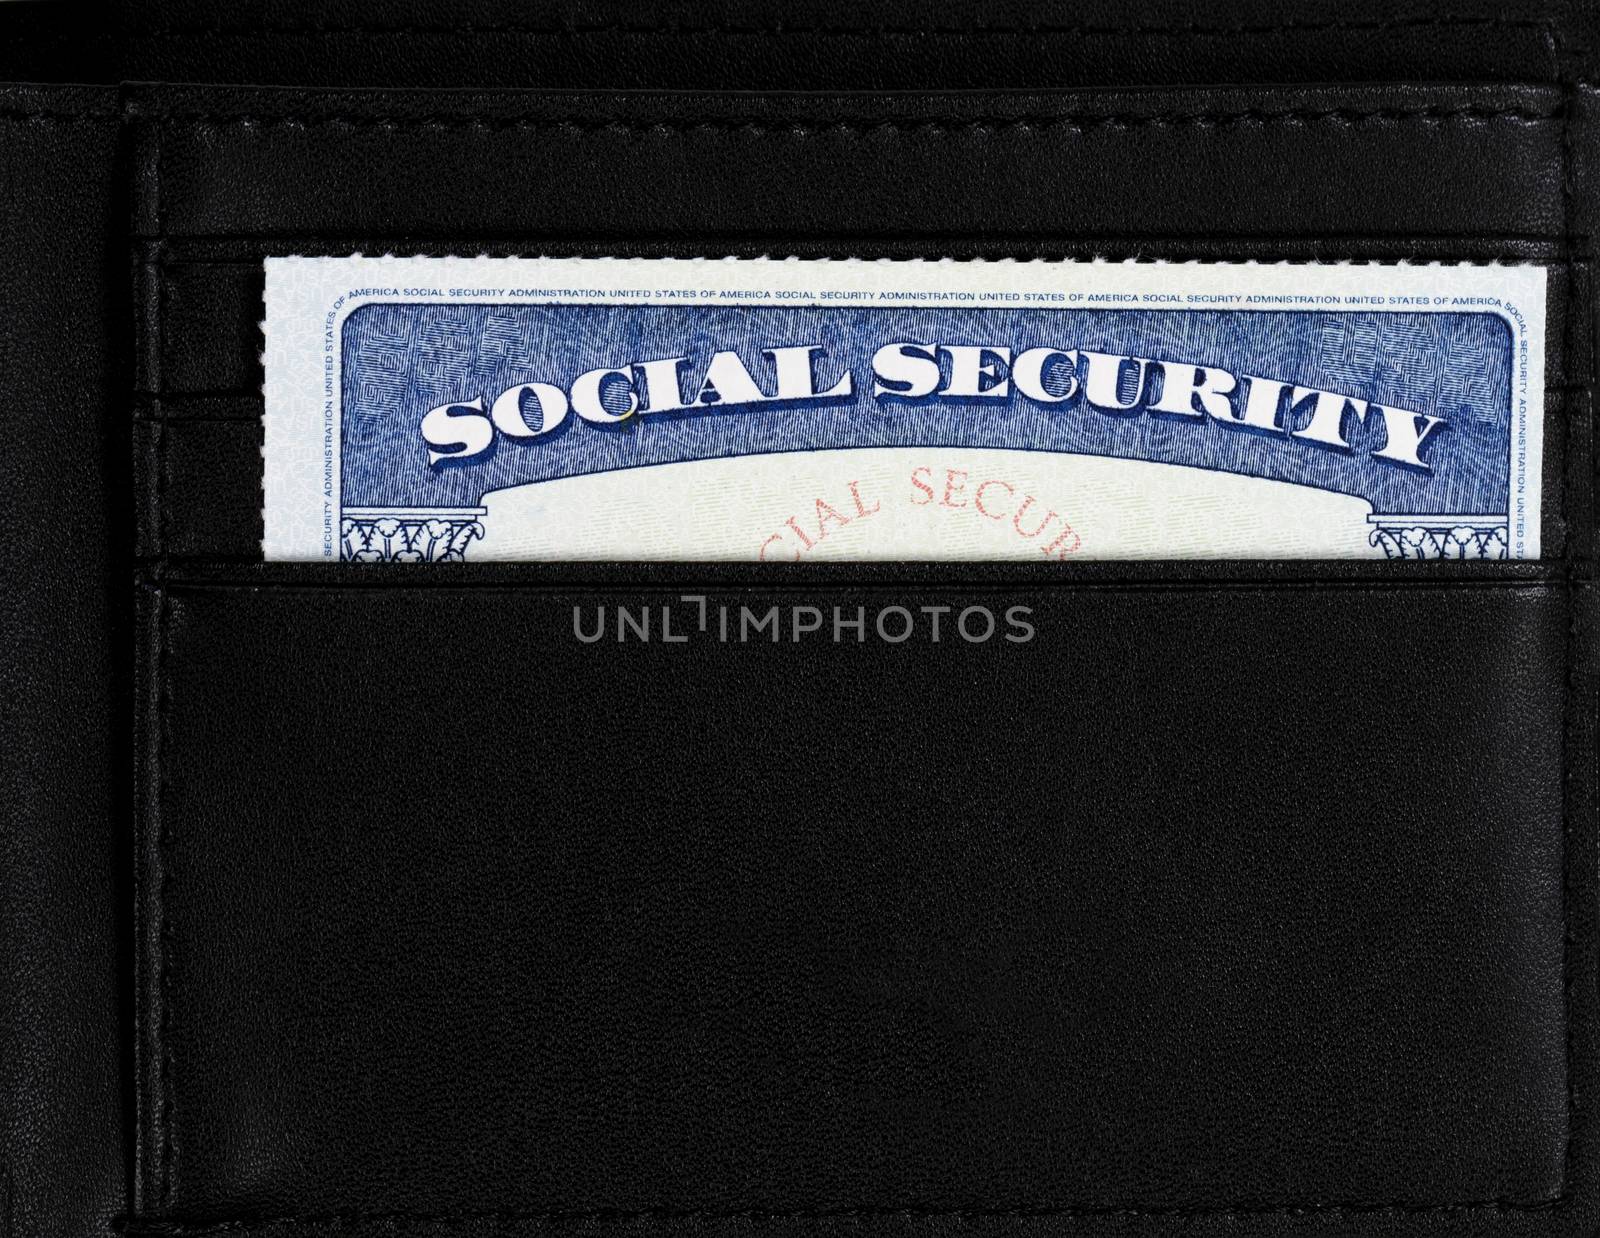 United States Social Security card inside of wallet by tab1962